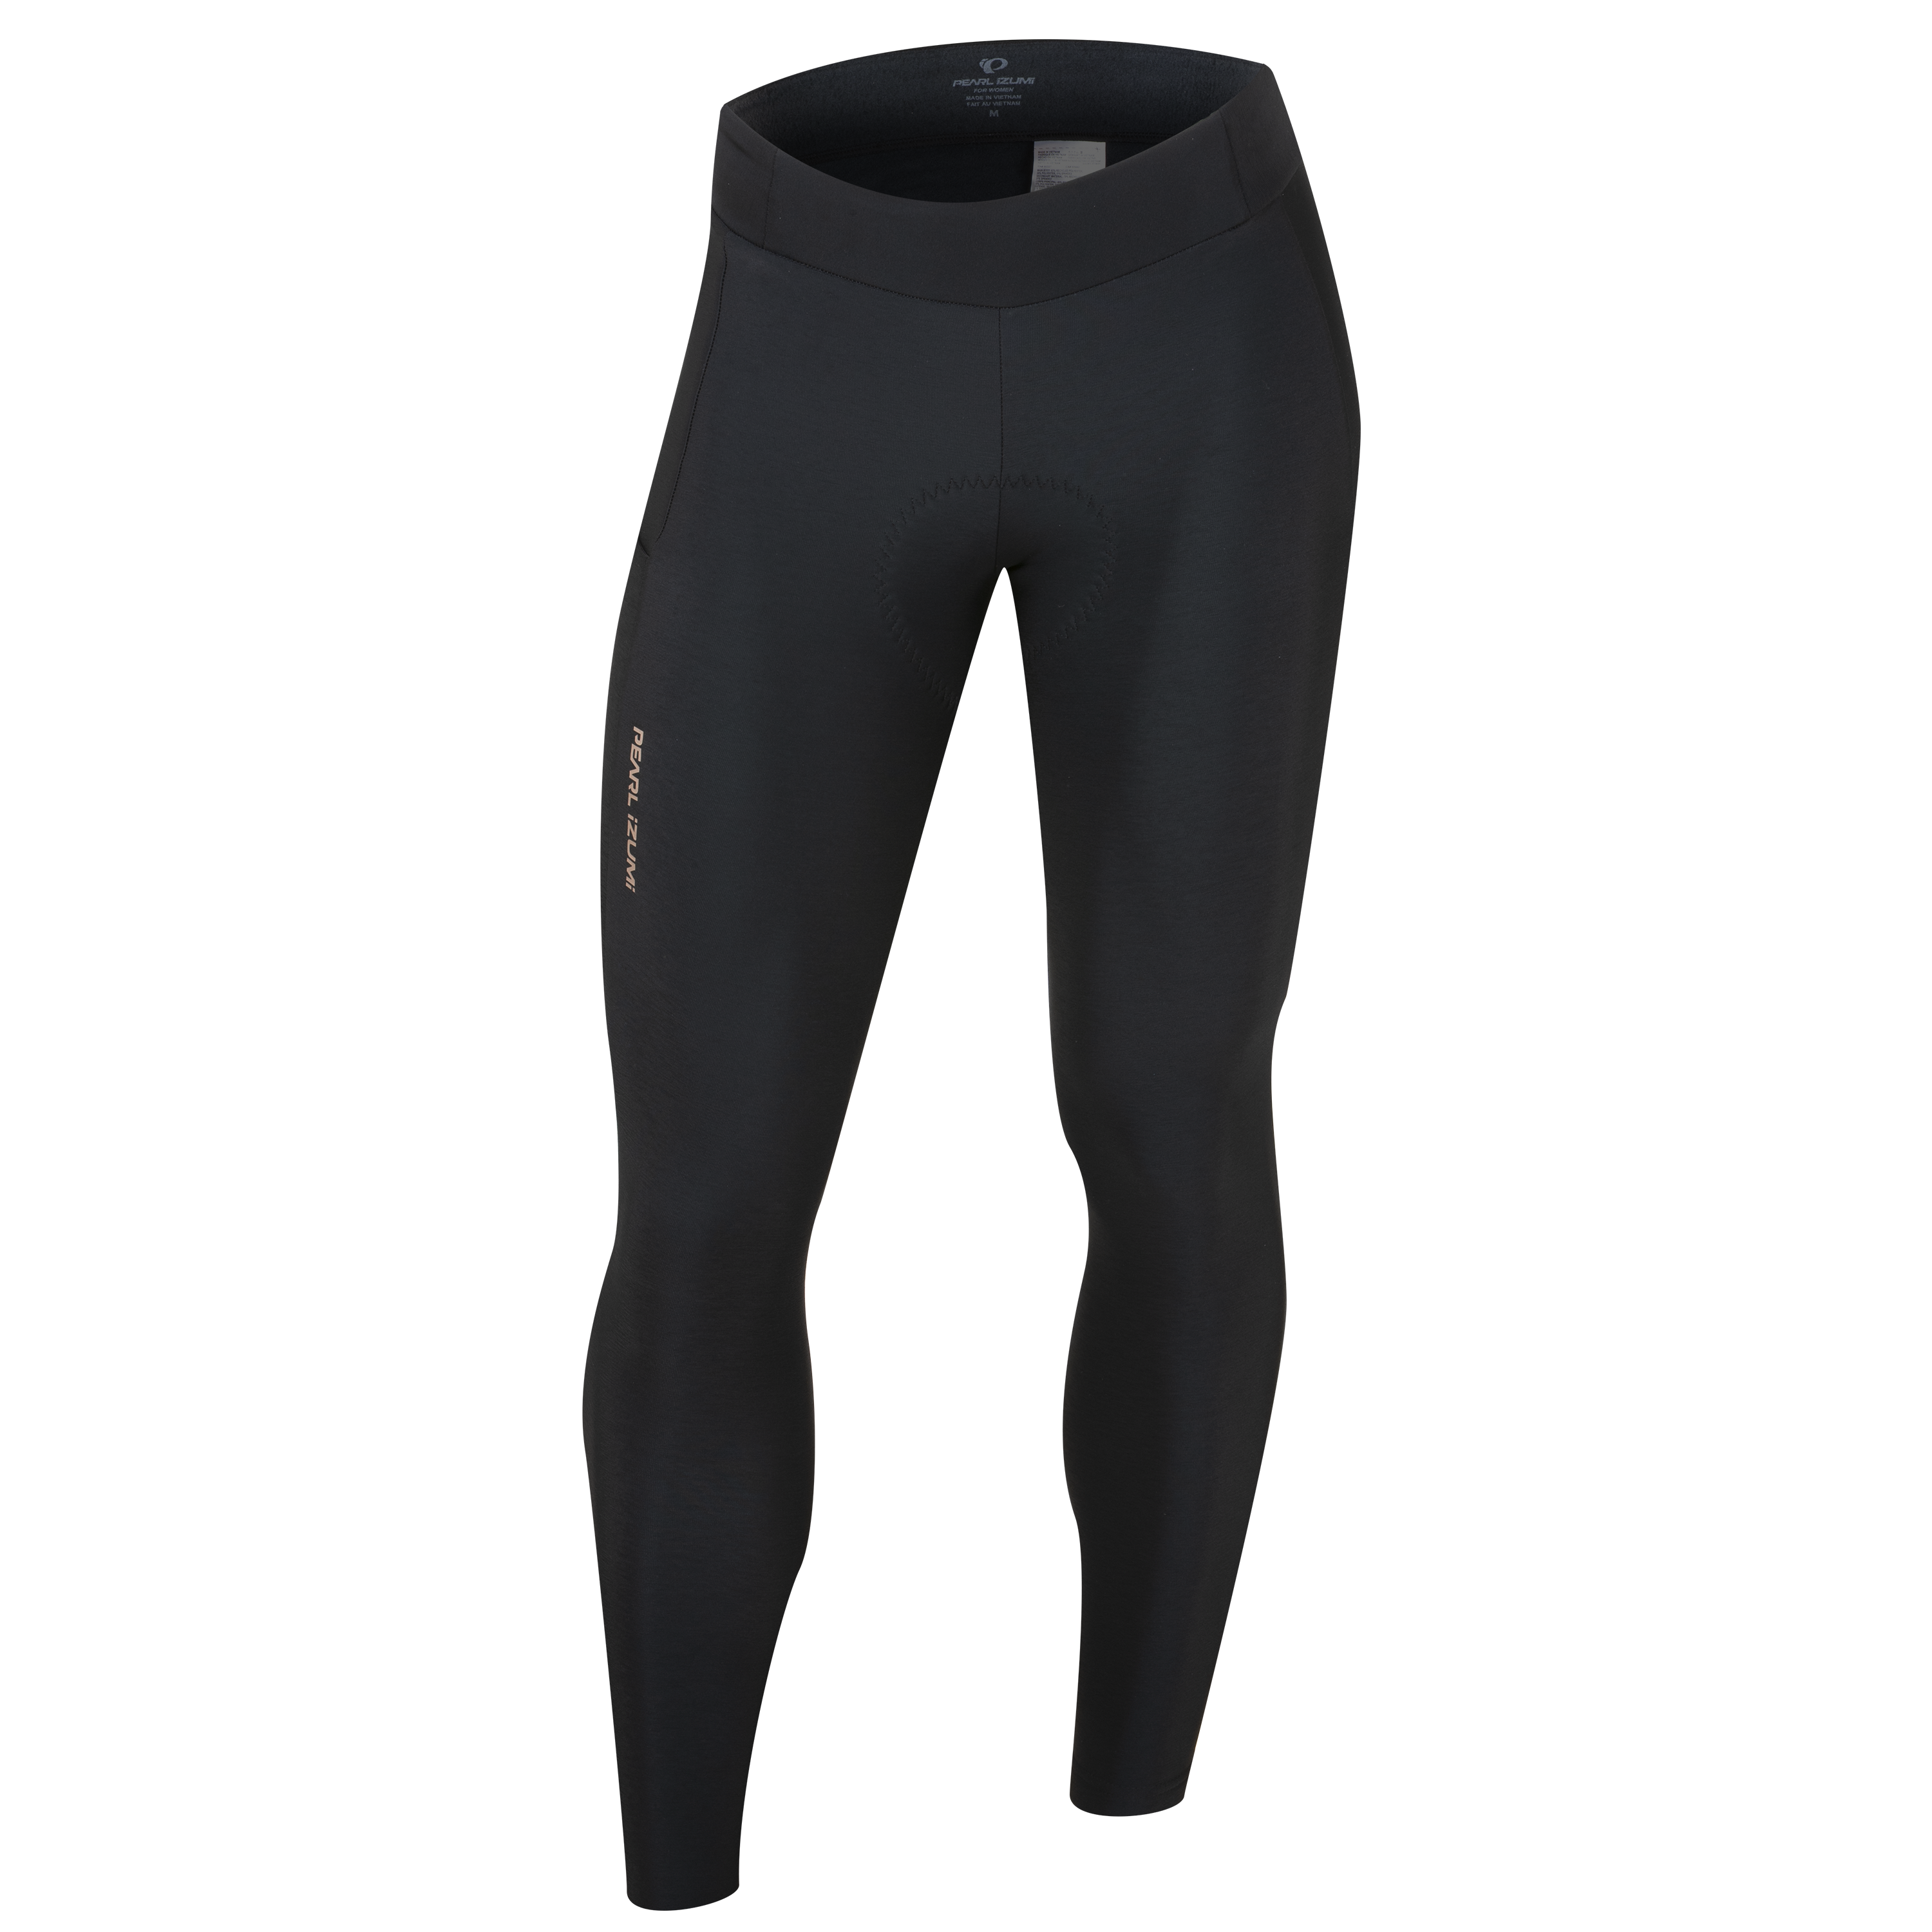 Pearl Izumi Technical Wear Cycling pants Ankle Zipper Drawstring Waist  Black M Size M - $41 - From Pearl